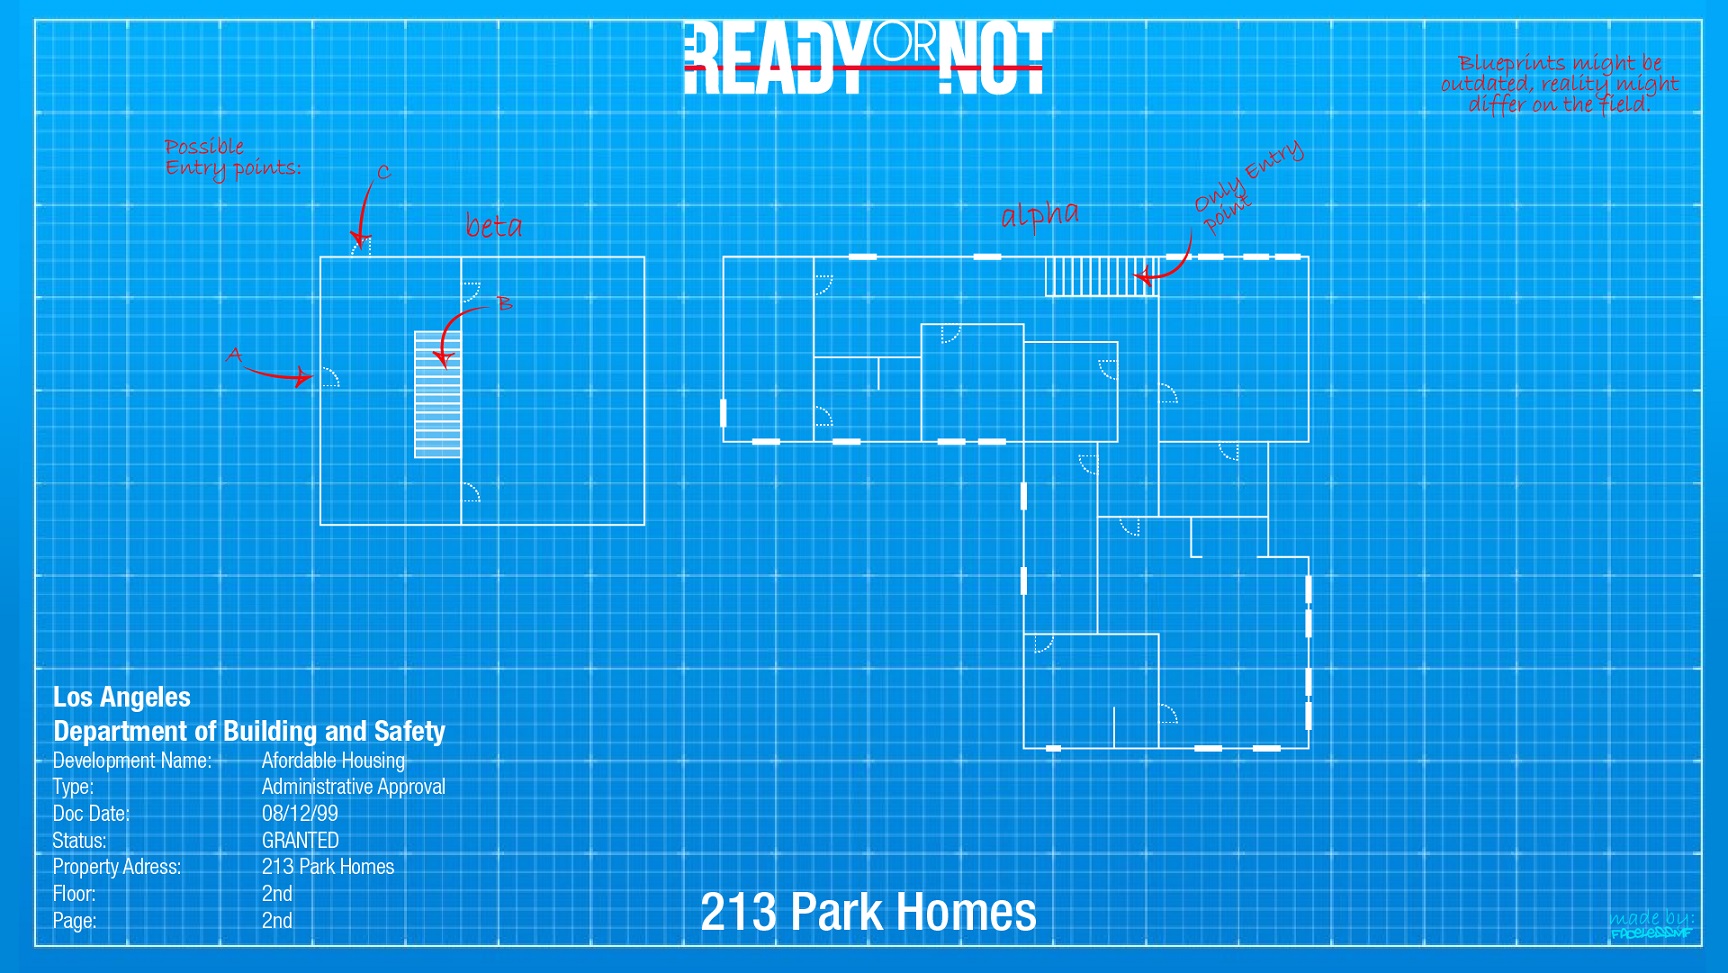 Ready or Not - Blueprints for 213 Park Homes - Second Floor - BFAD2B5